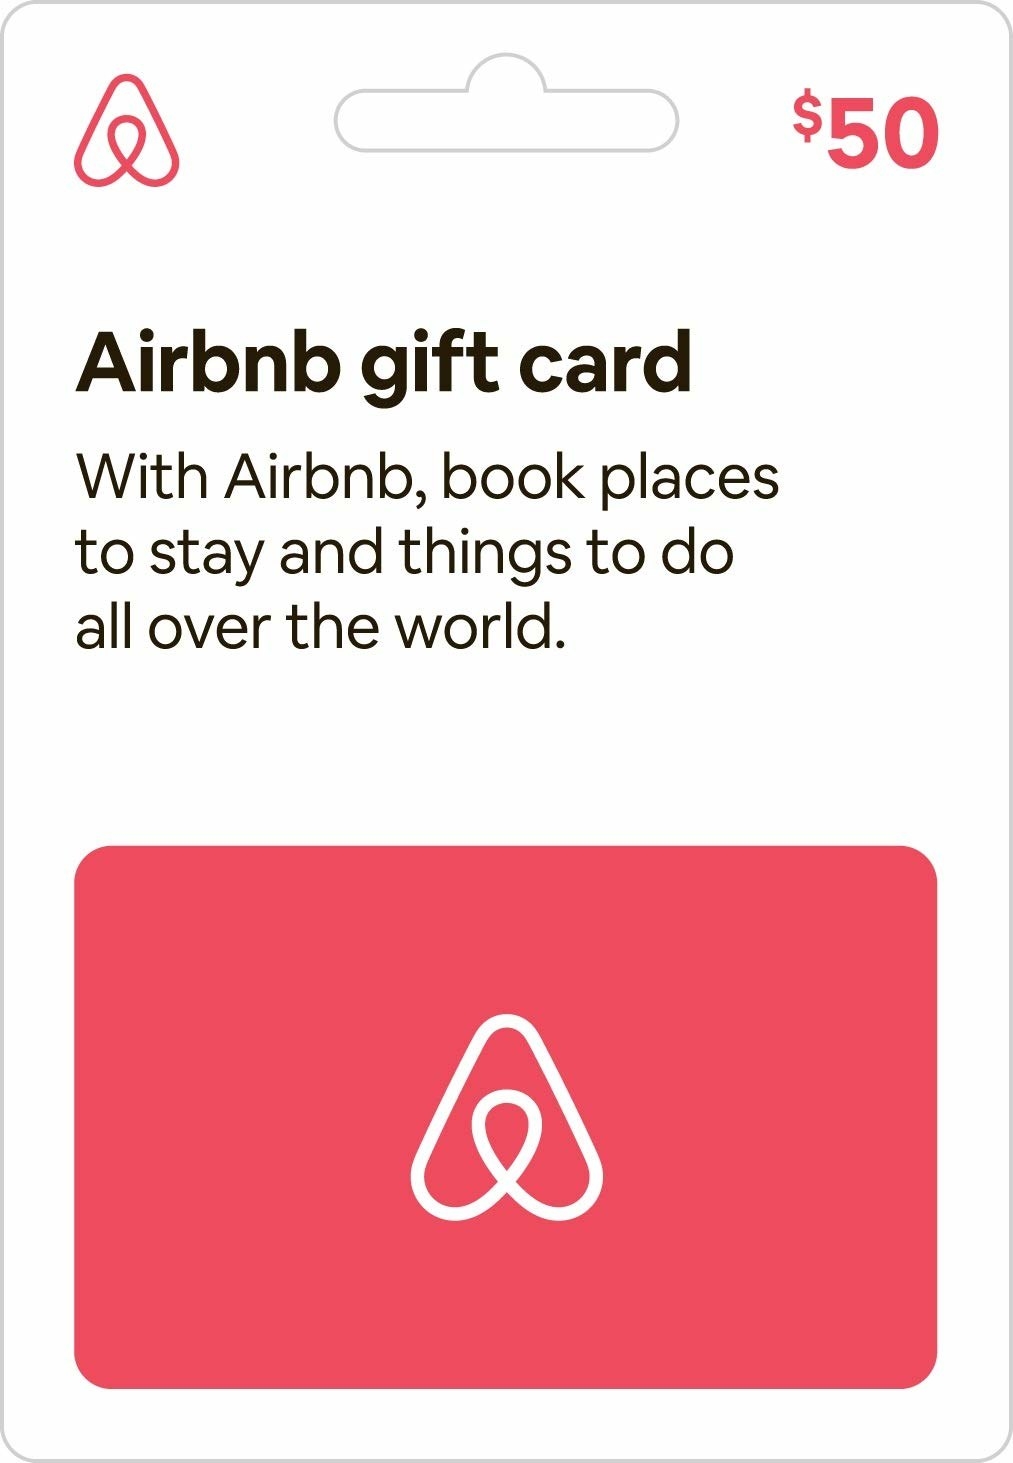 The $50 gift card